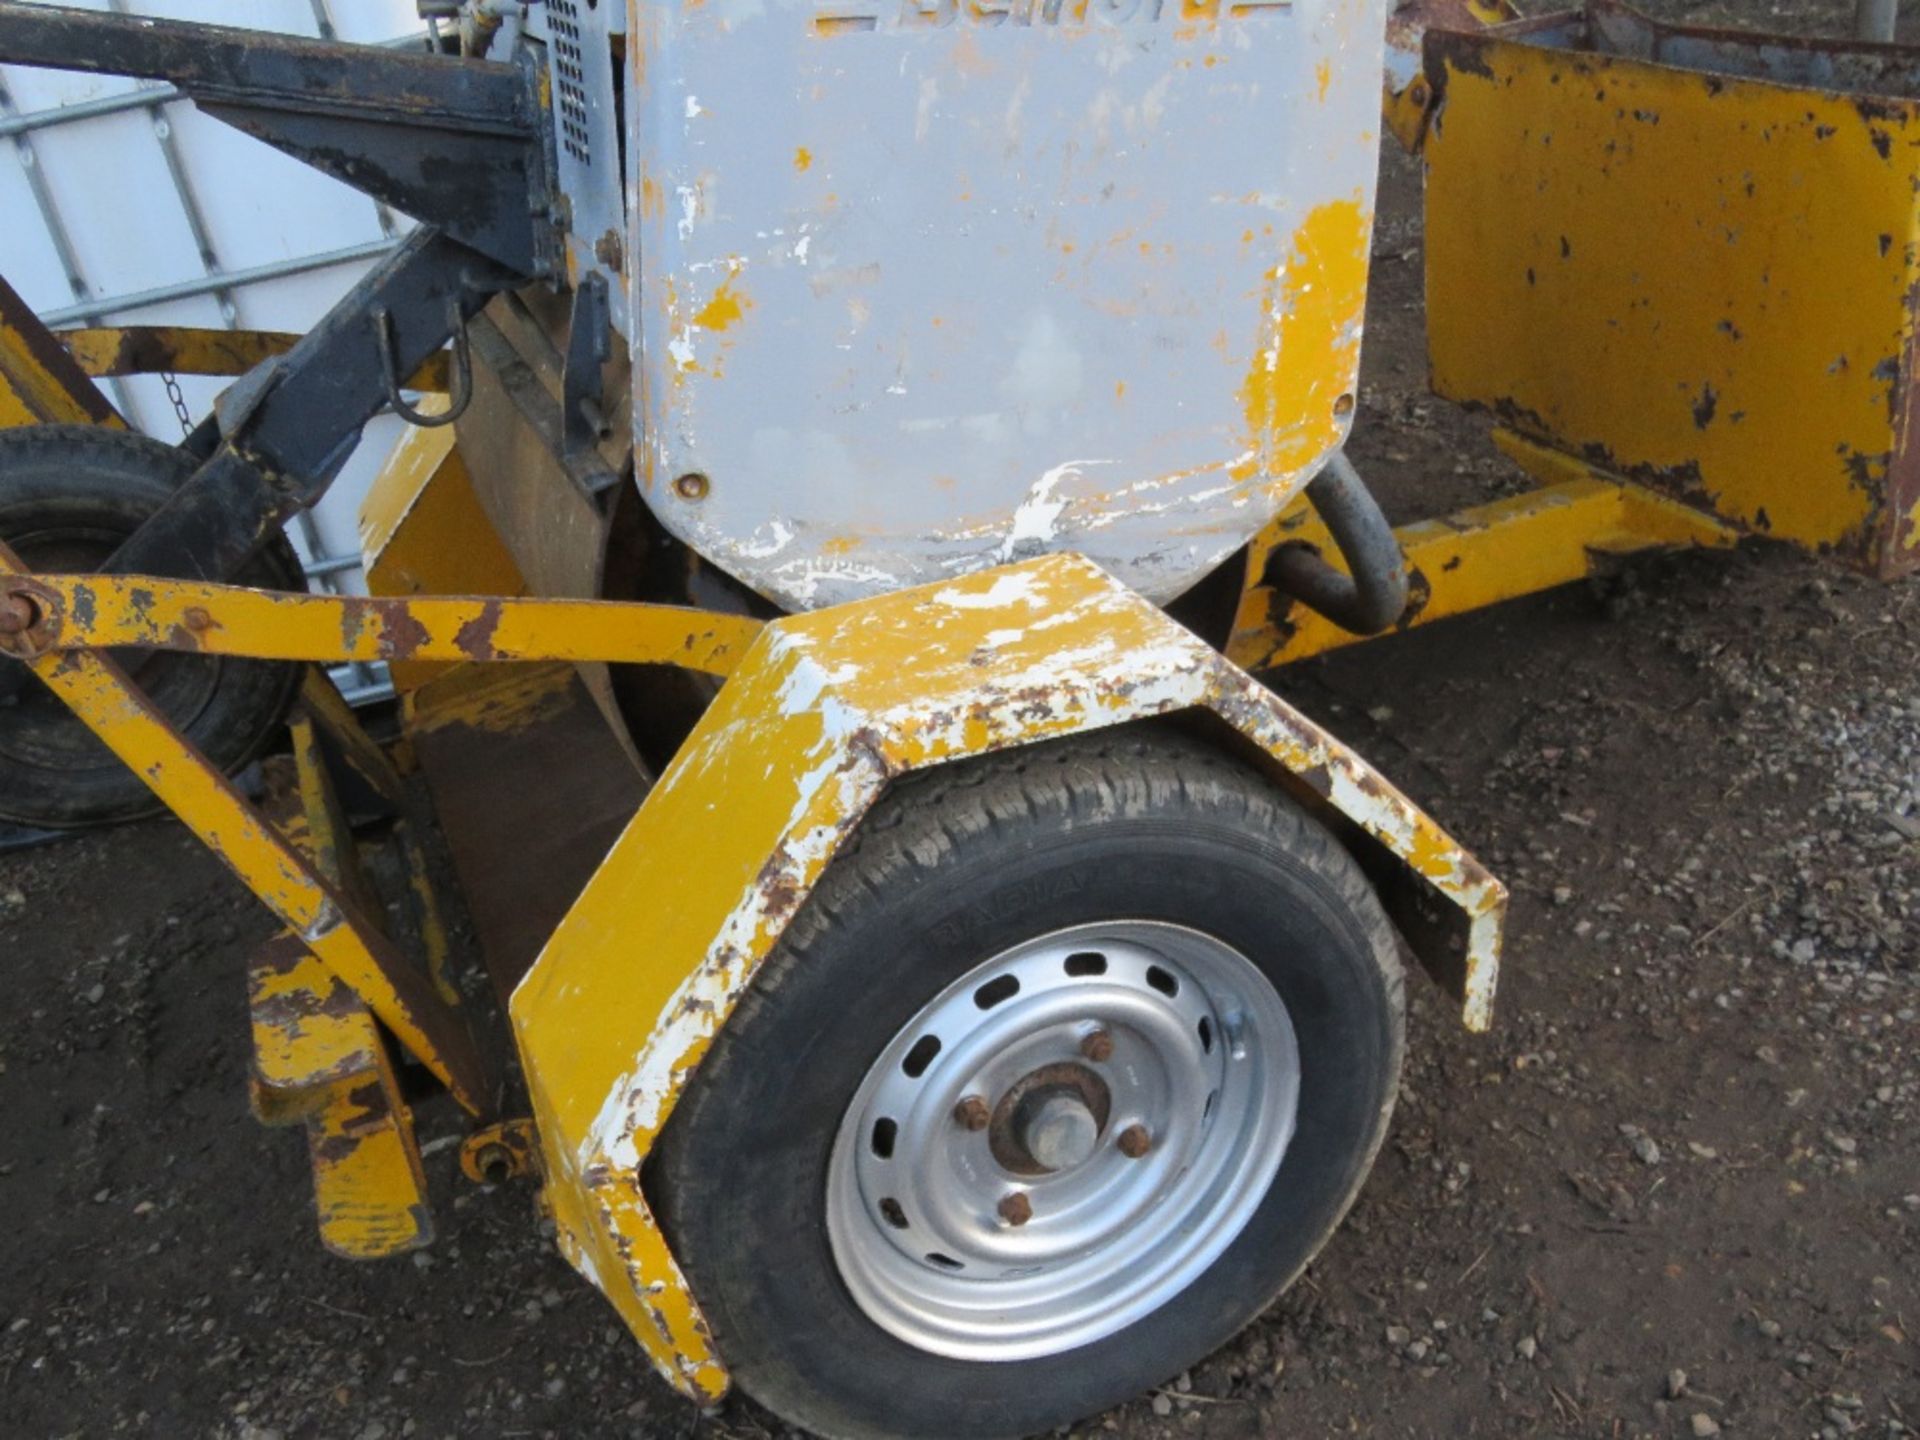 BENFORD MBR71 SINGLE DRUM ROLLER ON A TRAILER. WHEN TESTED WAS SEEN TO DRIVE, AND VIBRATE. NEW BATTE - Image 5 of 5